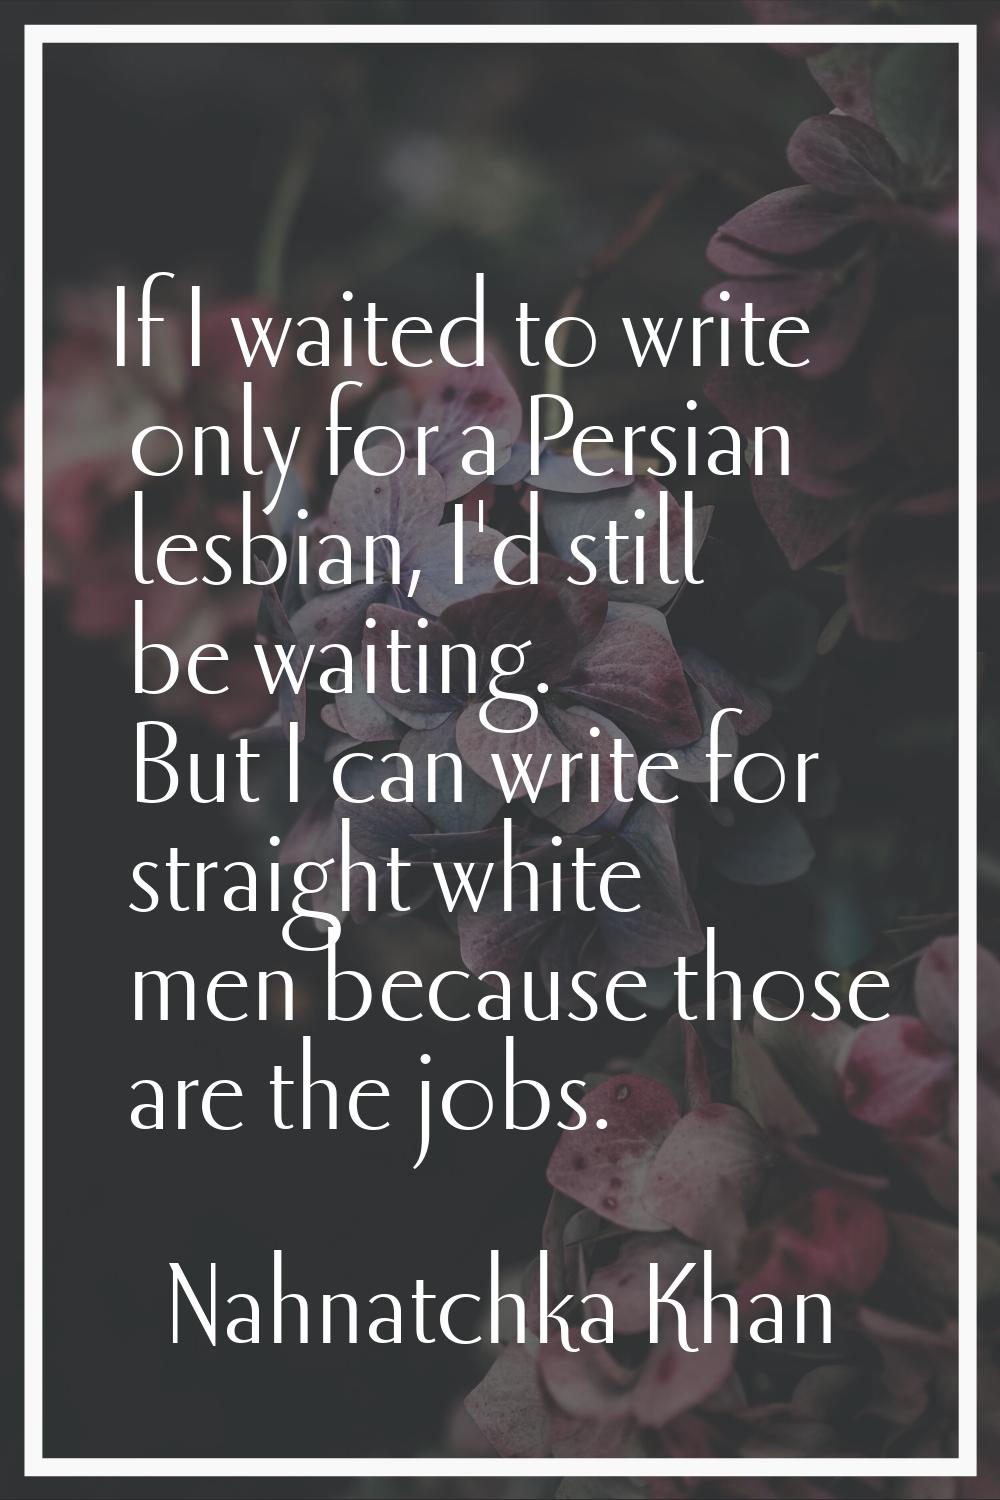 If I waited to write only for a Persian lesbian, I'd still be waiting. But I can write for straight